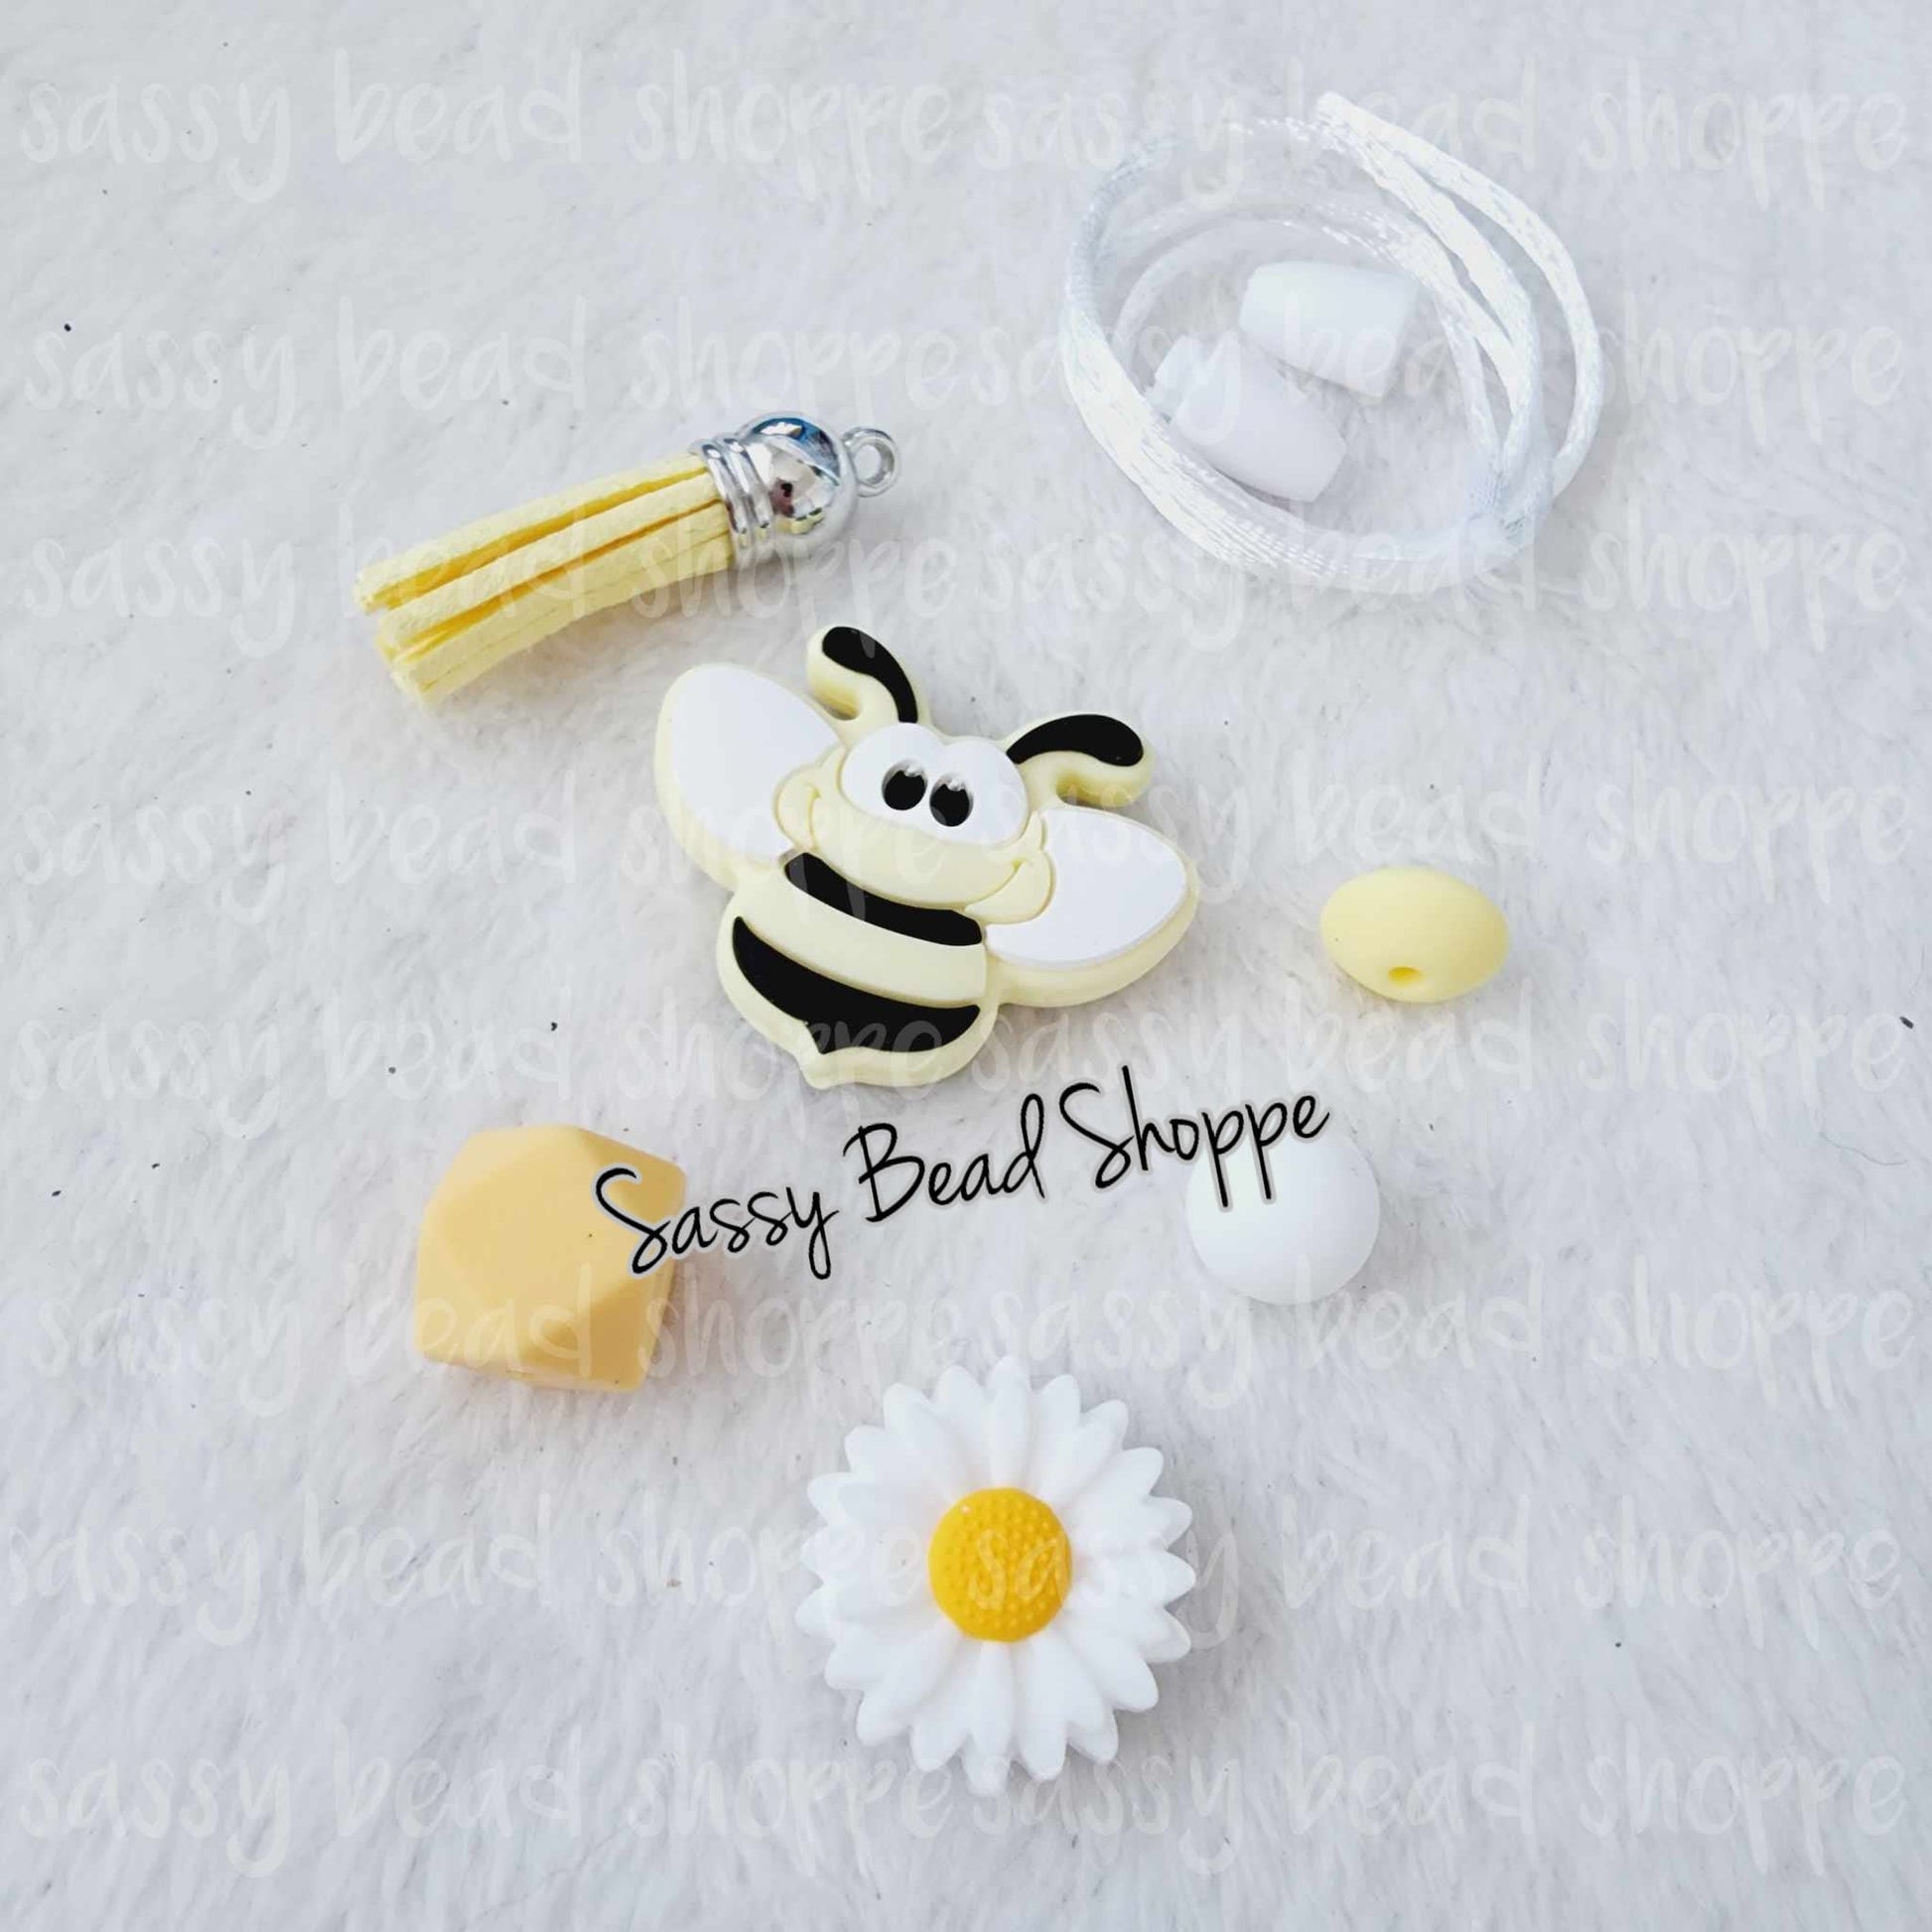 Sassy Bead Shoppe Bee Happy Car Charm What you will receive in your kit